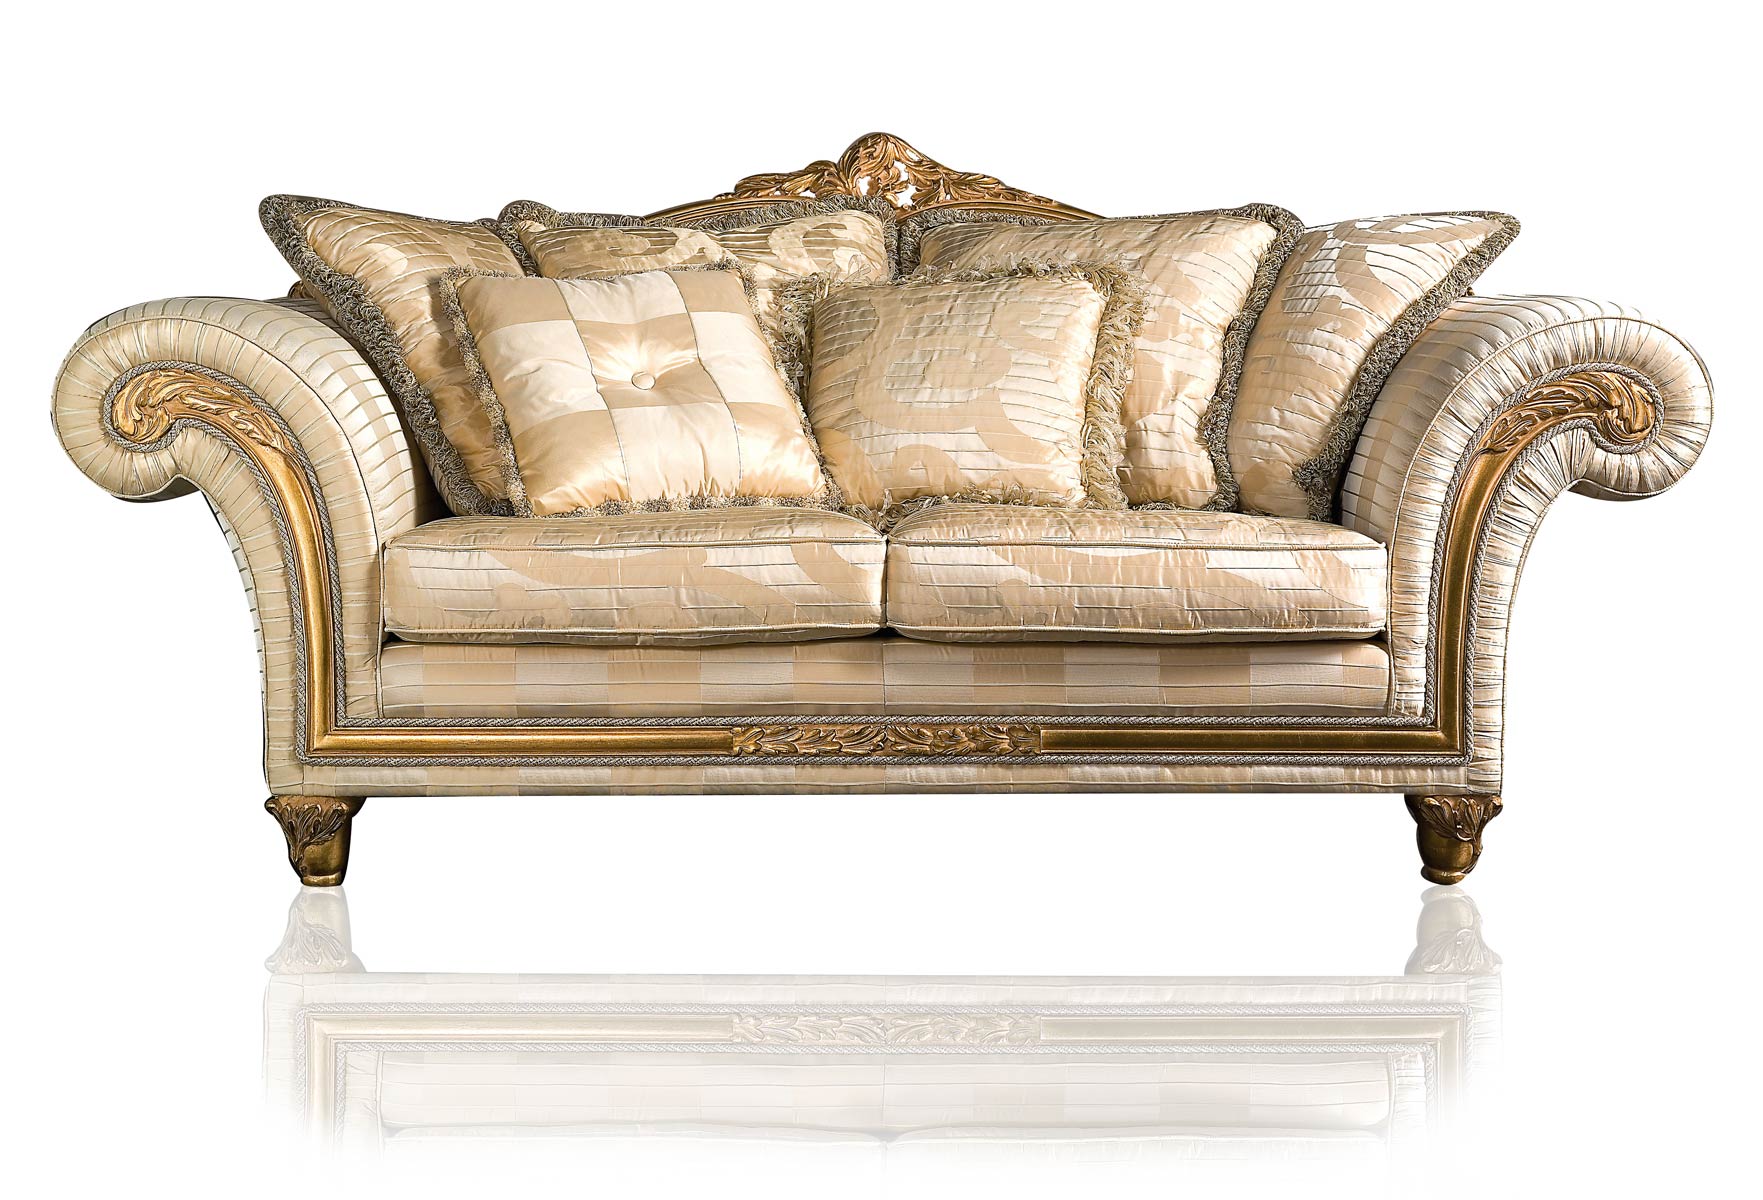 Luxury Classic Sofa and Armchairs – Imperial by Vimercati Media 